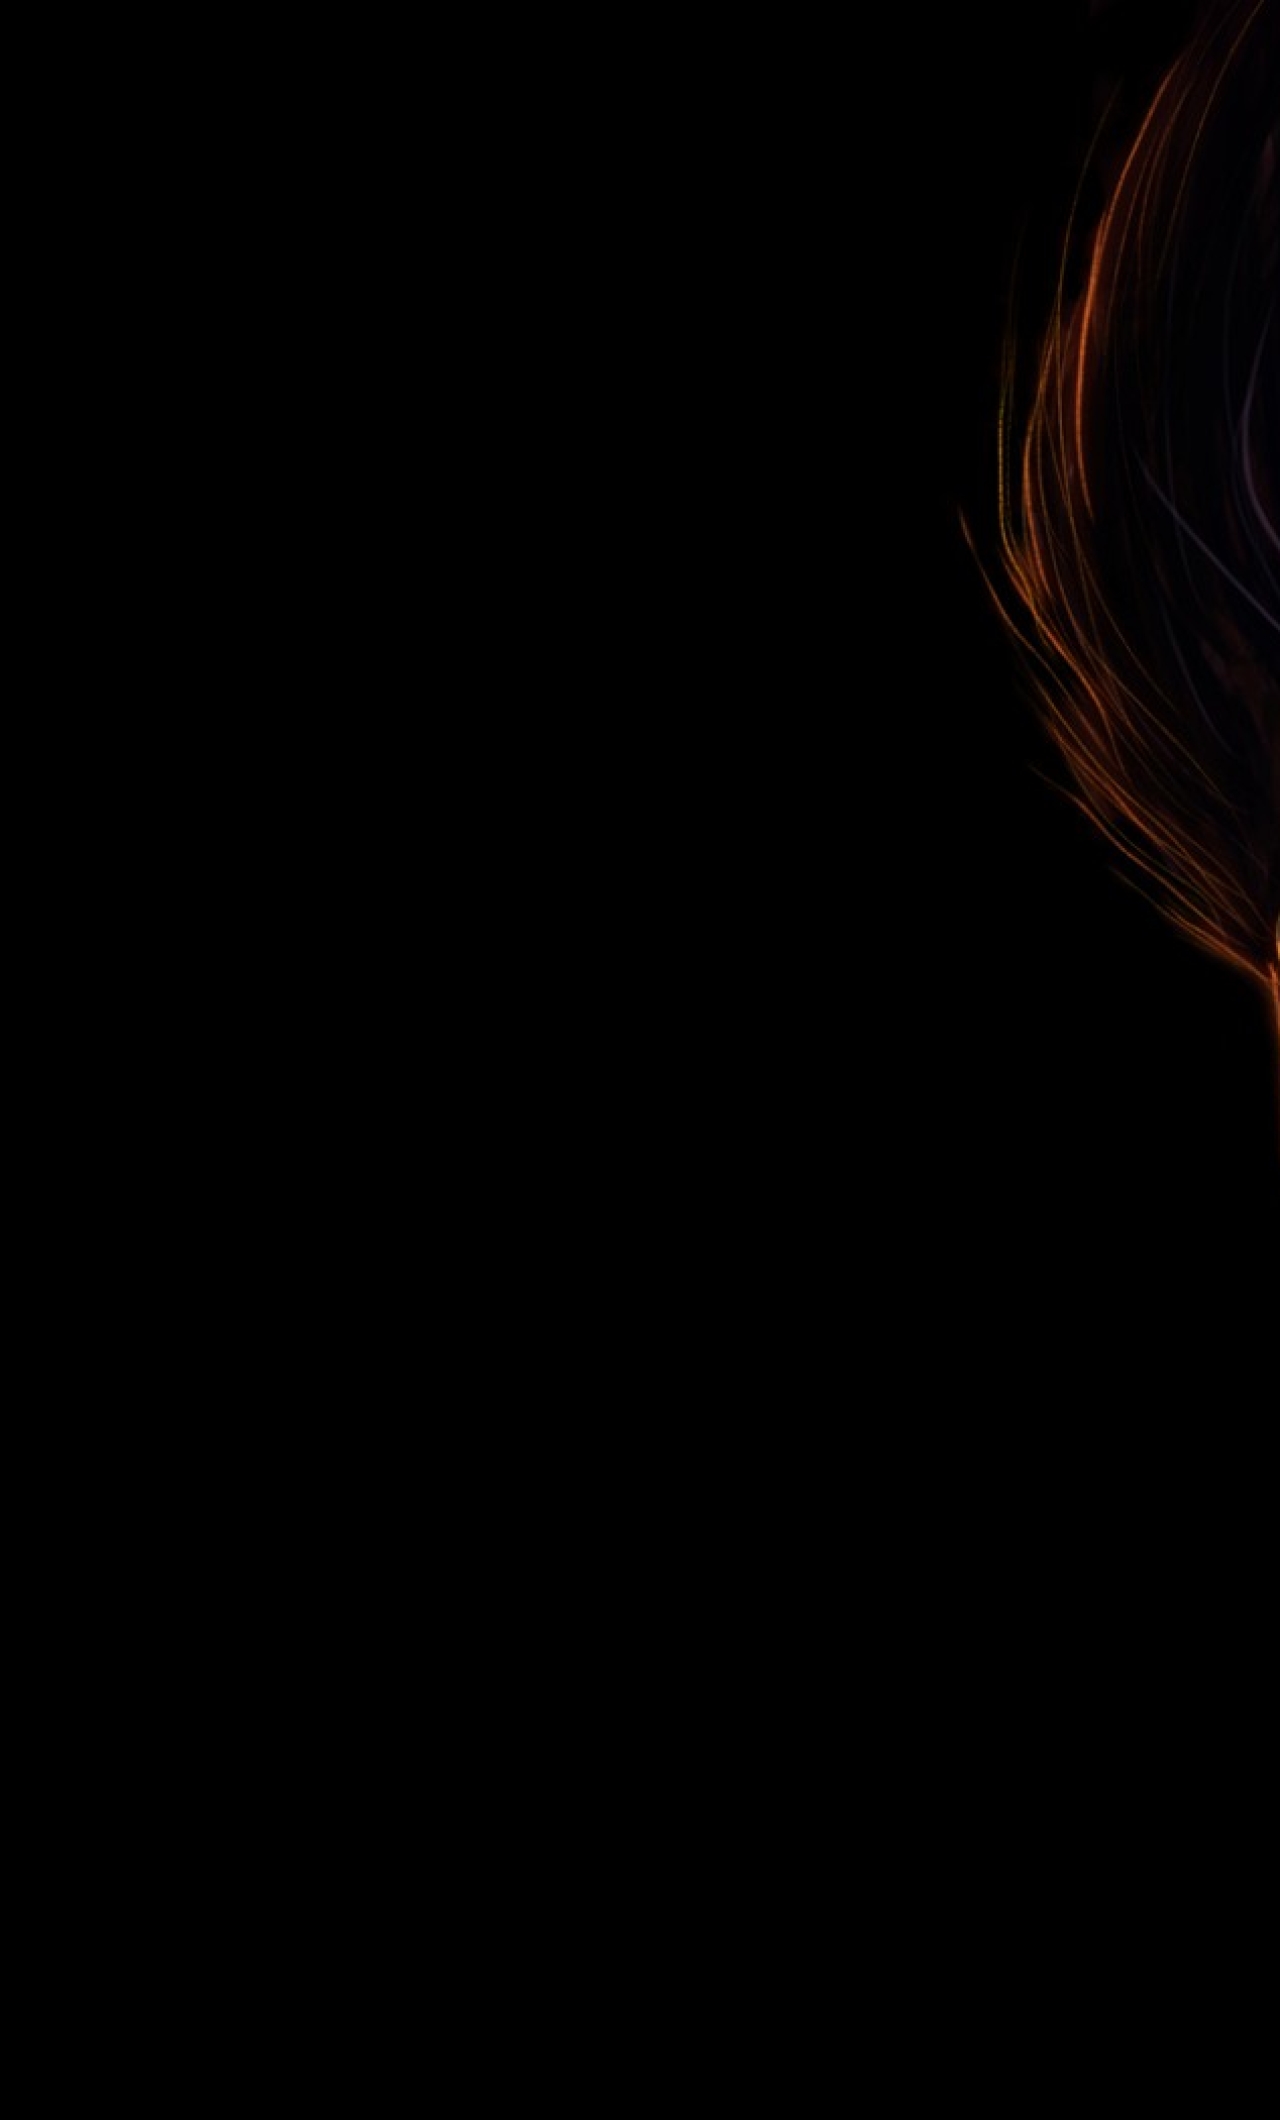 1280x21 Death Note Death Note Ryuk Iphone 6 Plus Wallpaper Hd Tv Series 4k Wallpapers Images Photos And Background